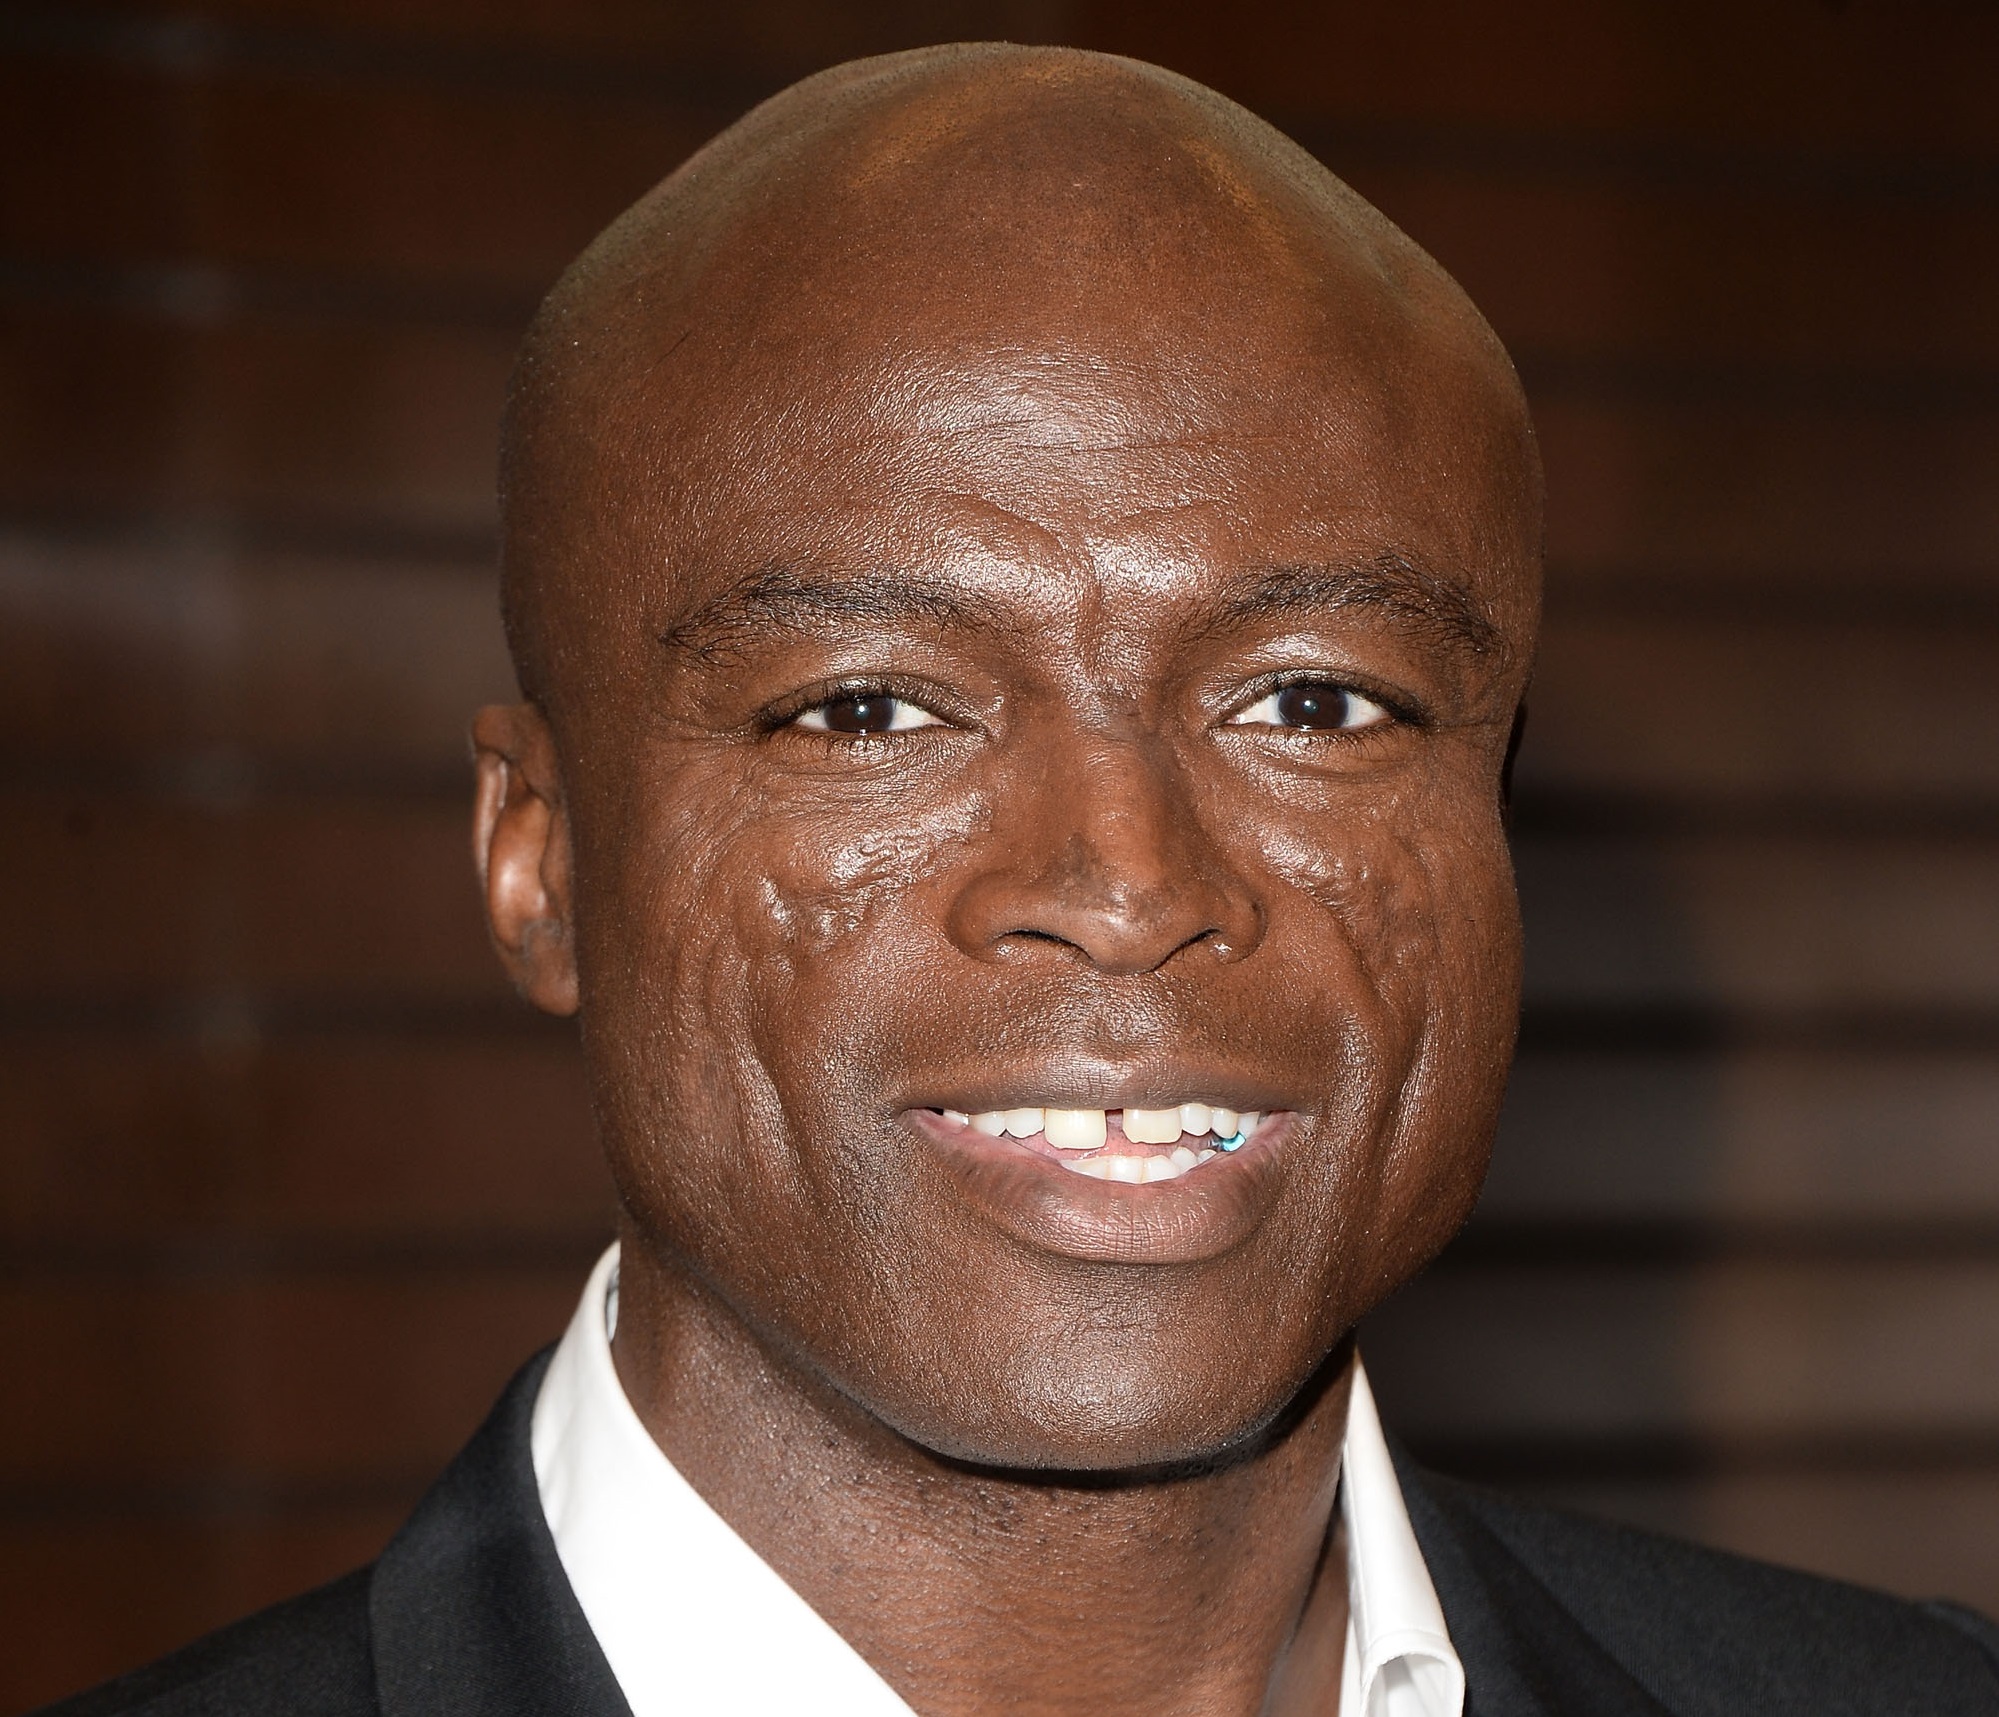 Musician Seal Face Scars, Seal Face Scarring, Discoid Lupus Erythematosus, What Happened to Seal's Face, Seal Face Scars Caused By, Was Seal Burned